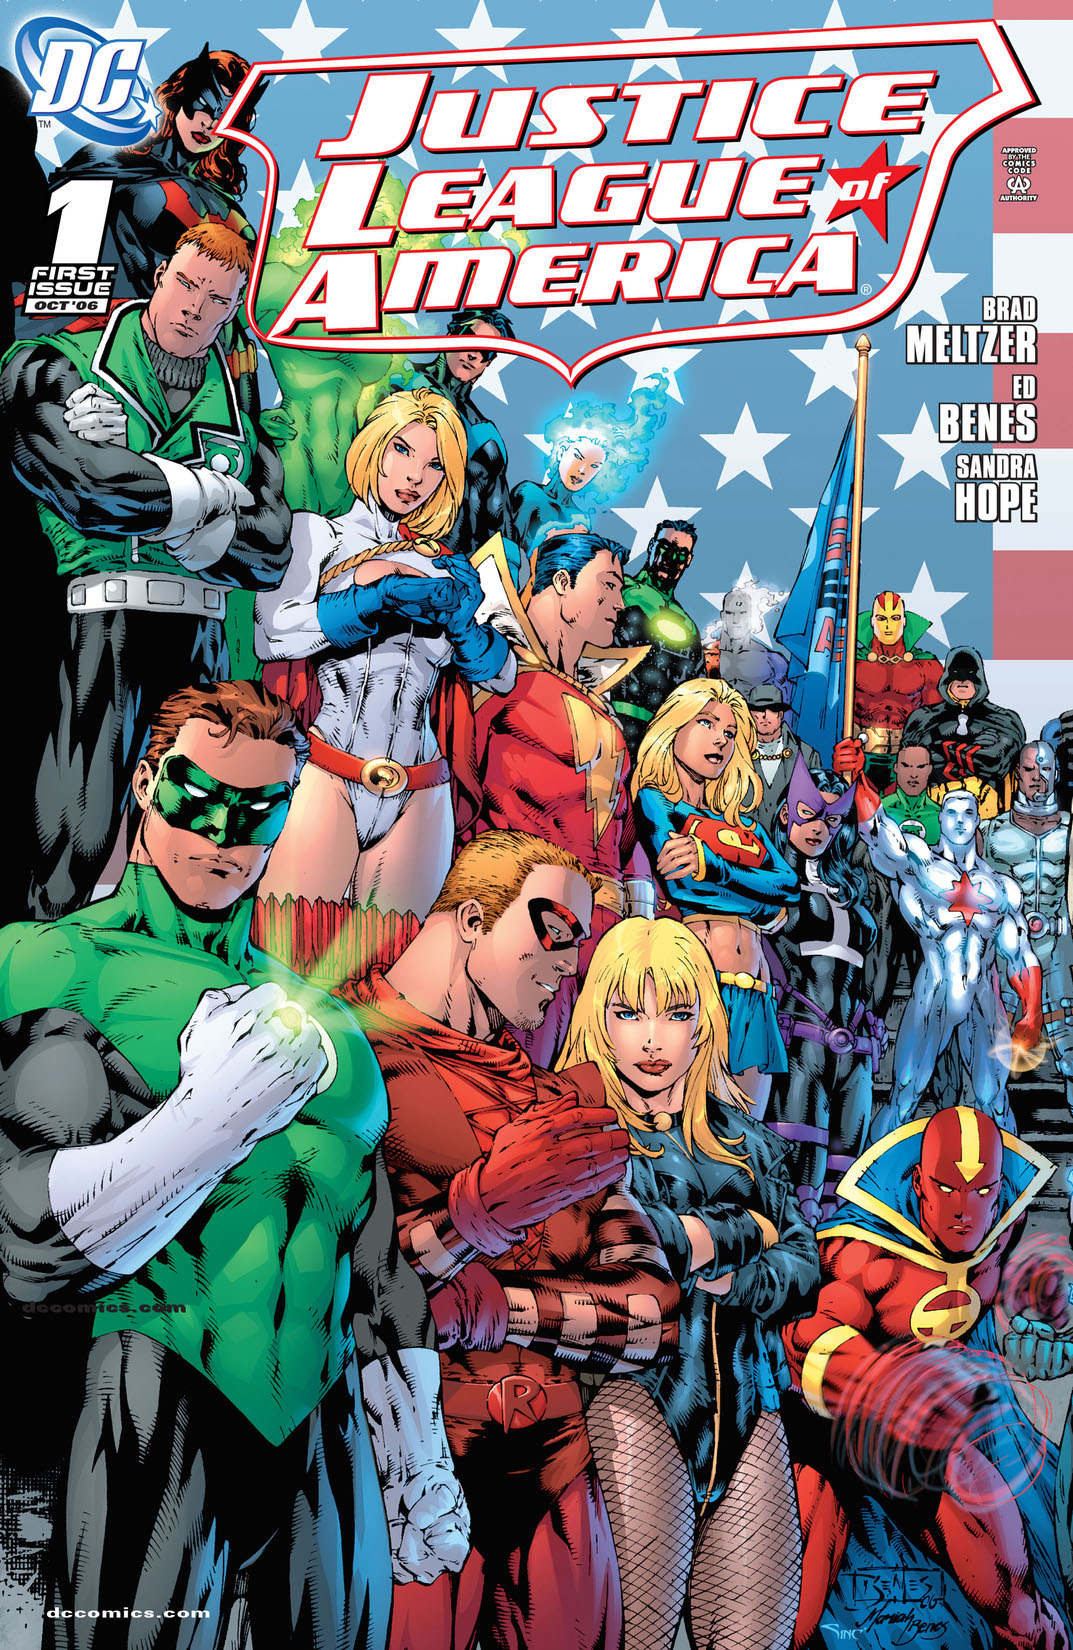 Justice League of America (2006-) #1 preview images